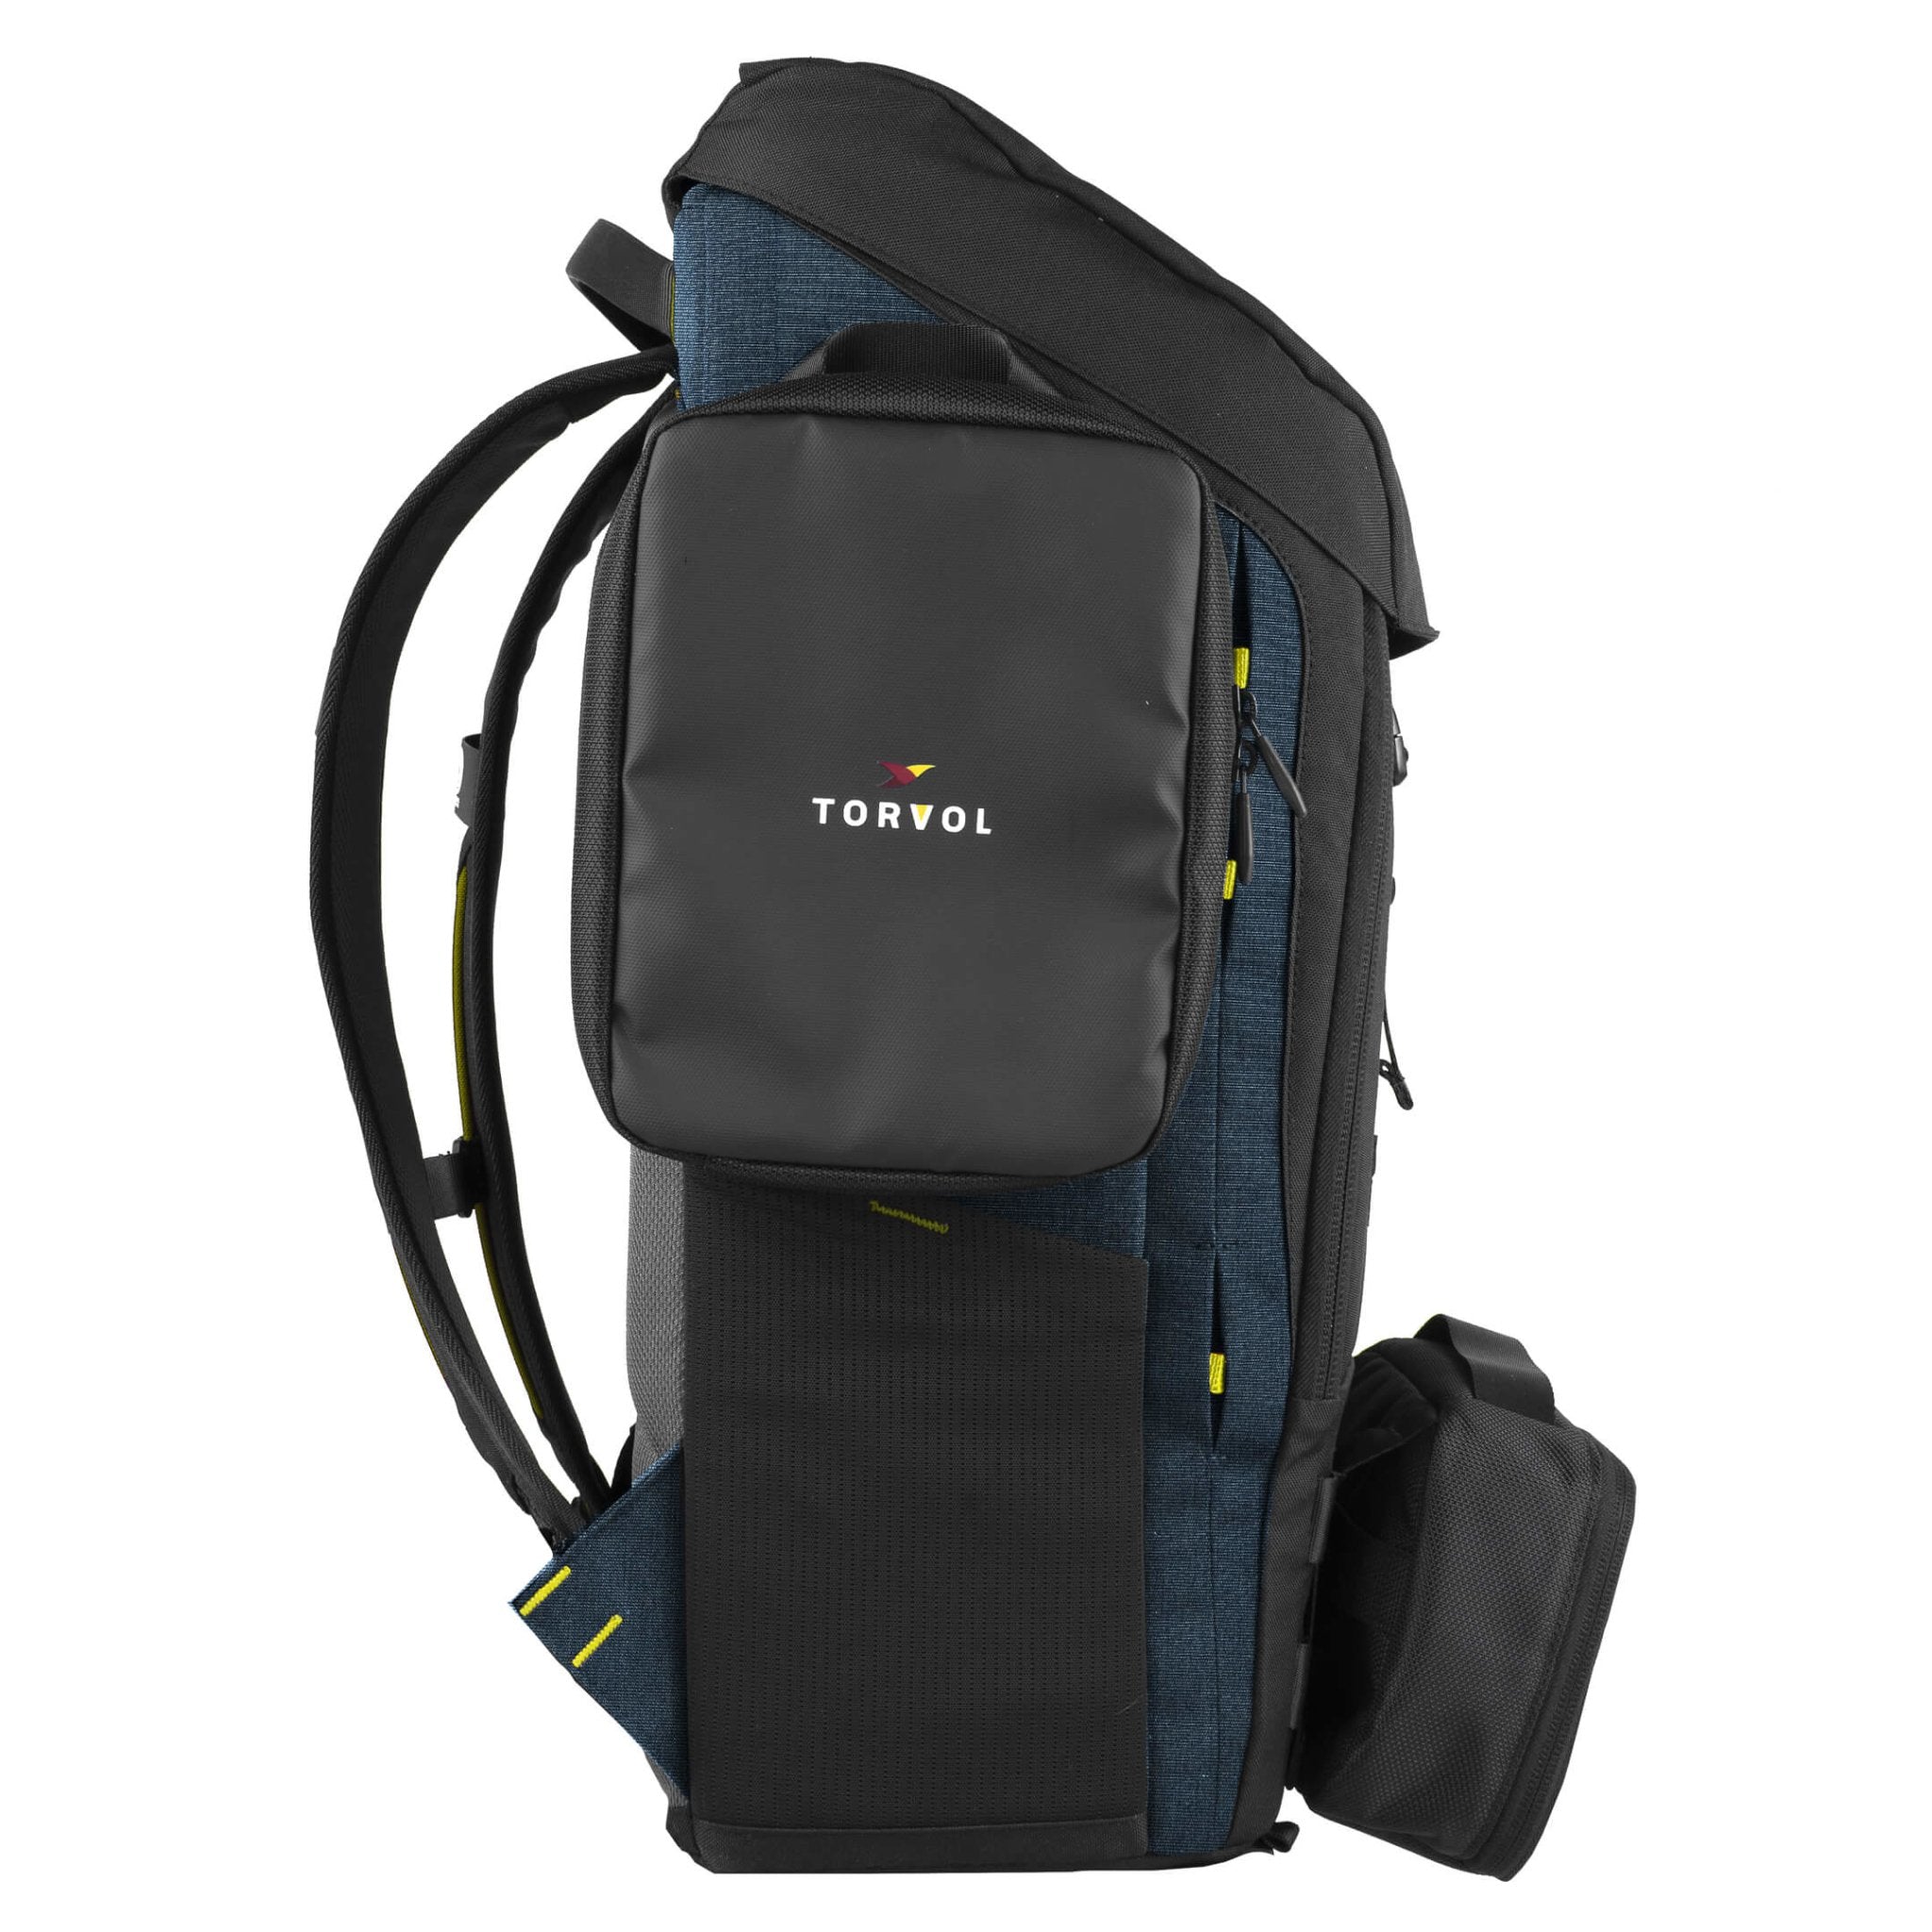 Torvol Urban Carrier Backpack - Your All-Round Freestyle Backpack 14 - Torvol - Drone Authority